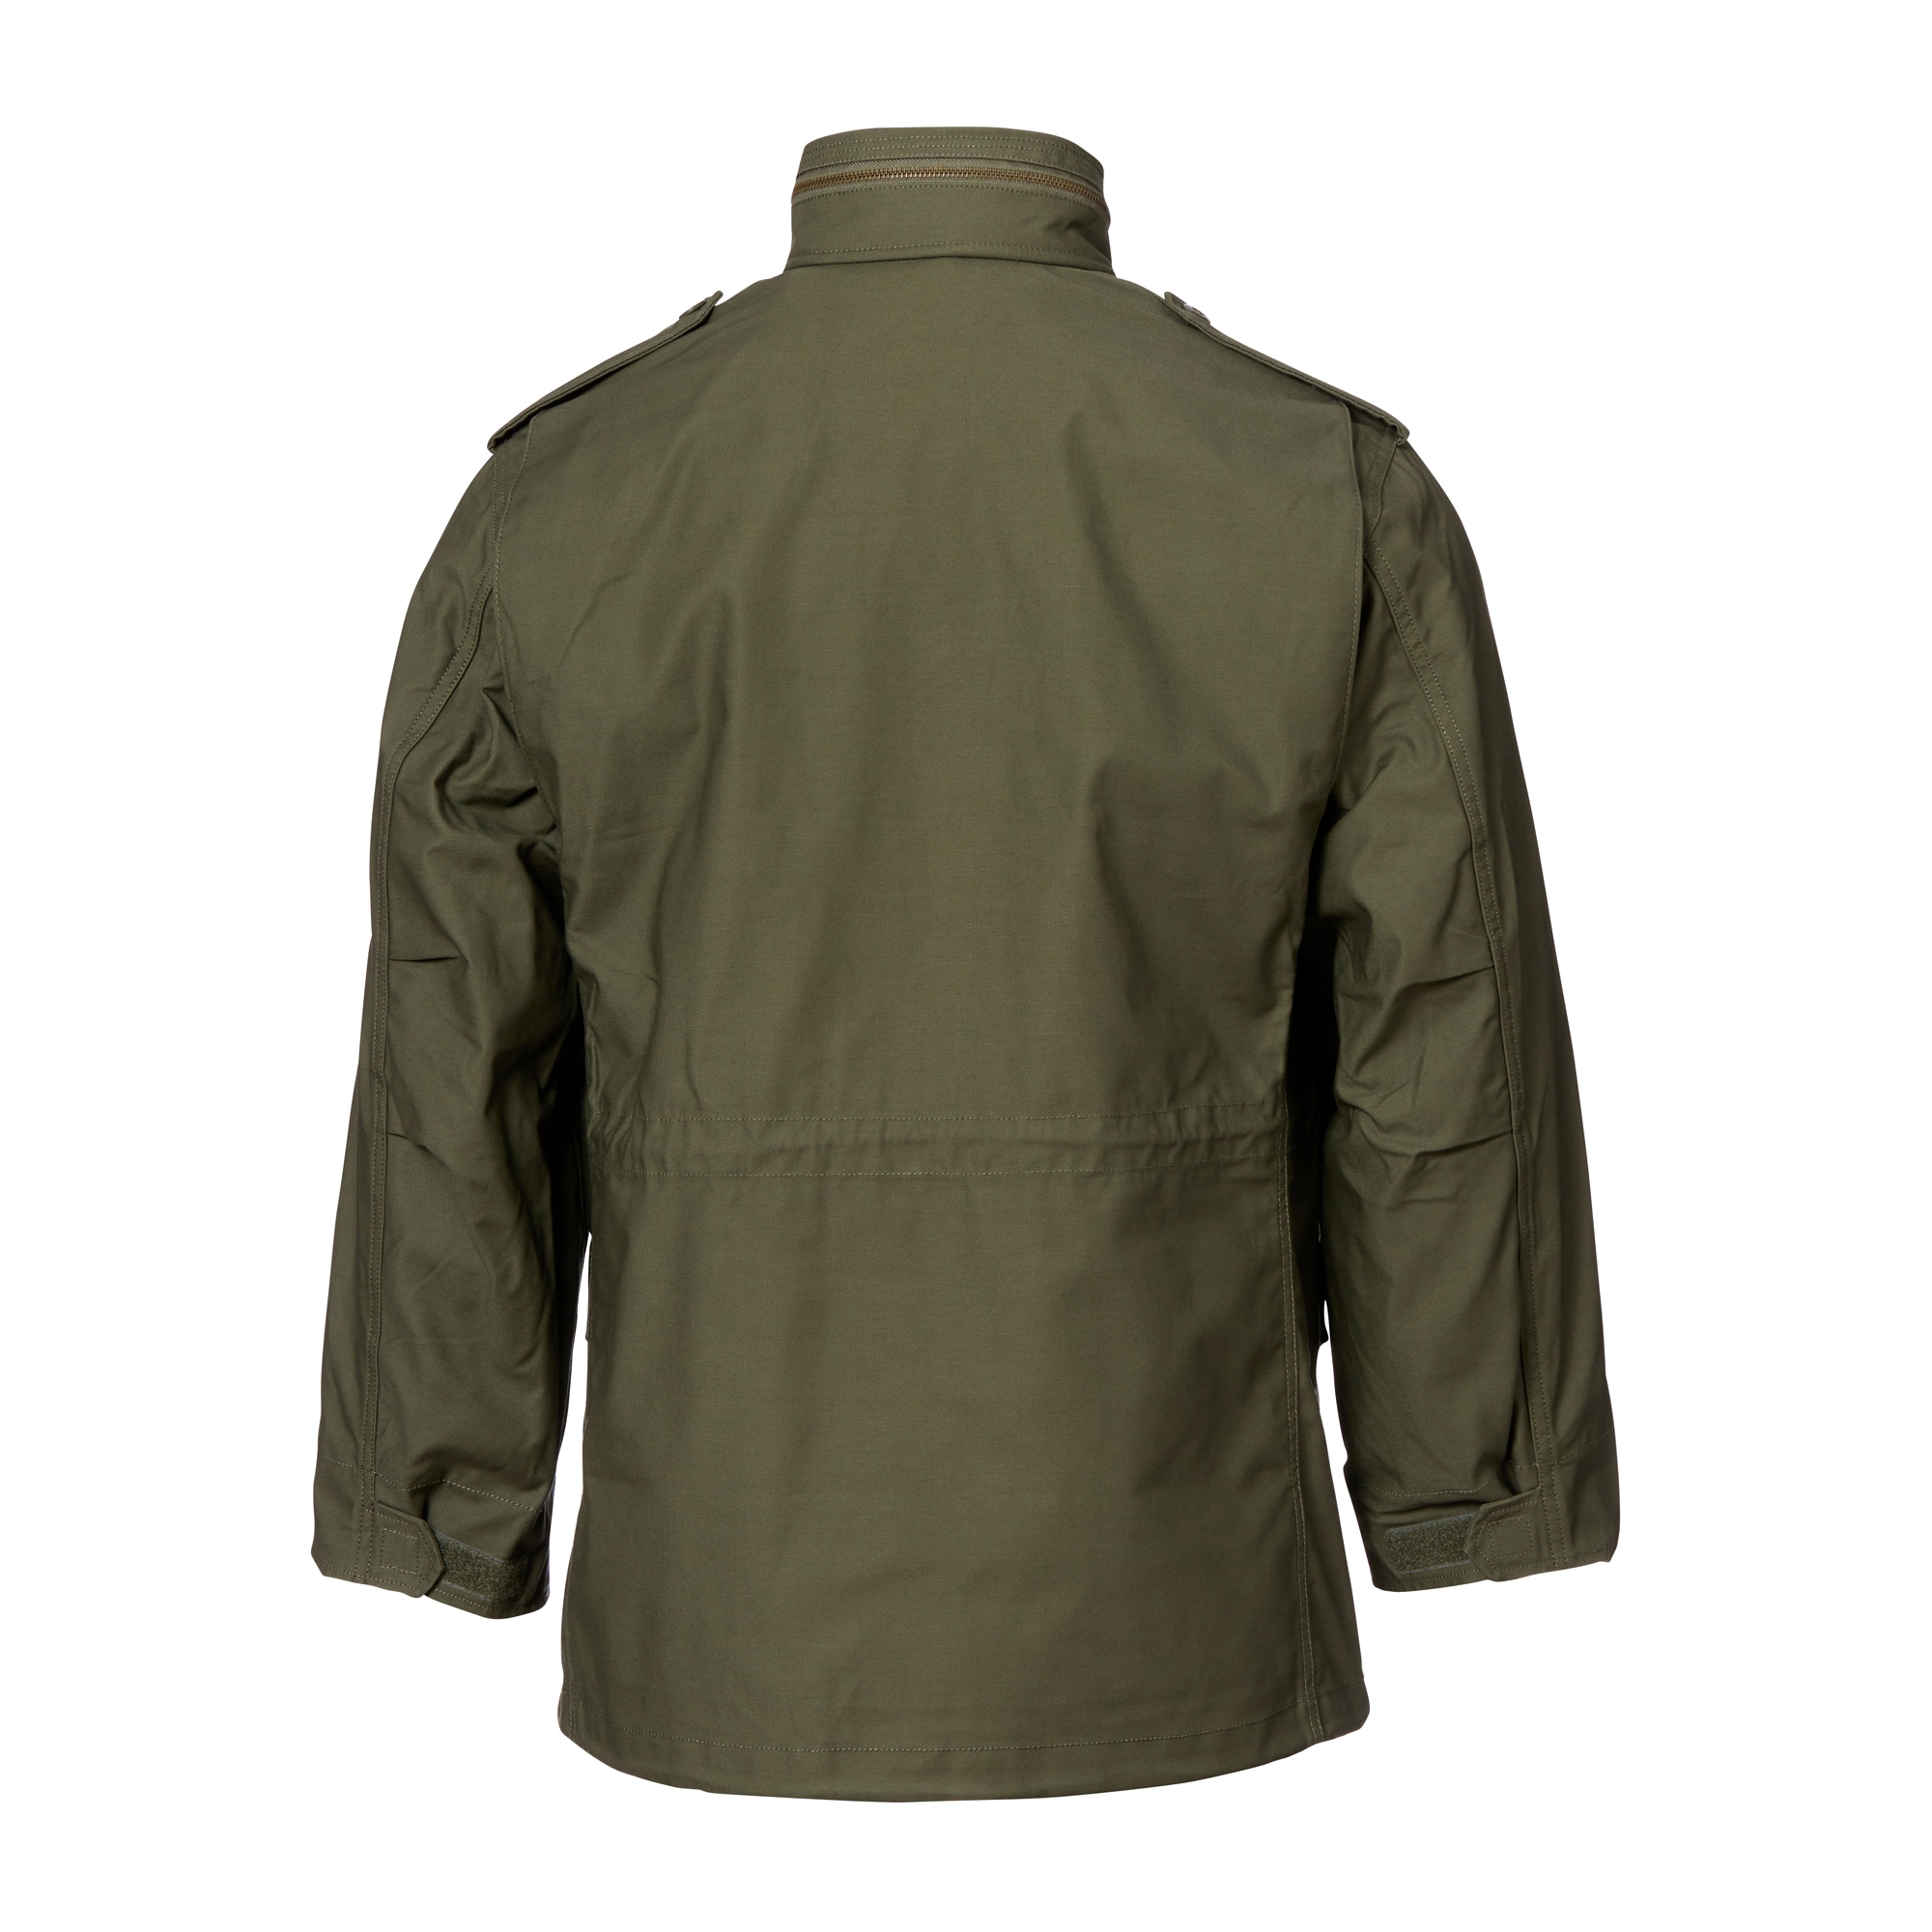 Purchase the Alpha ASMC Industries M65 Jacket Field olive by